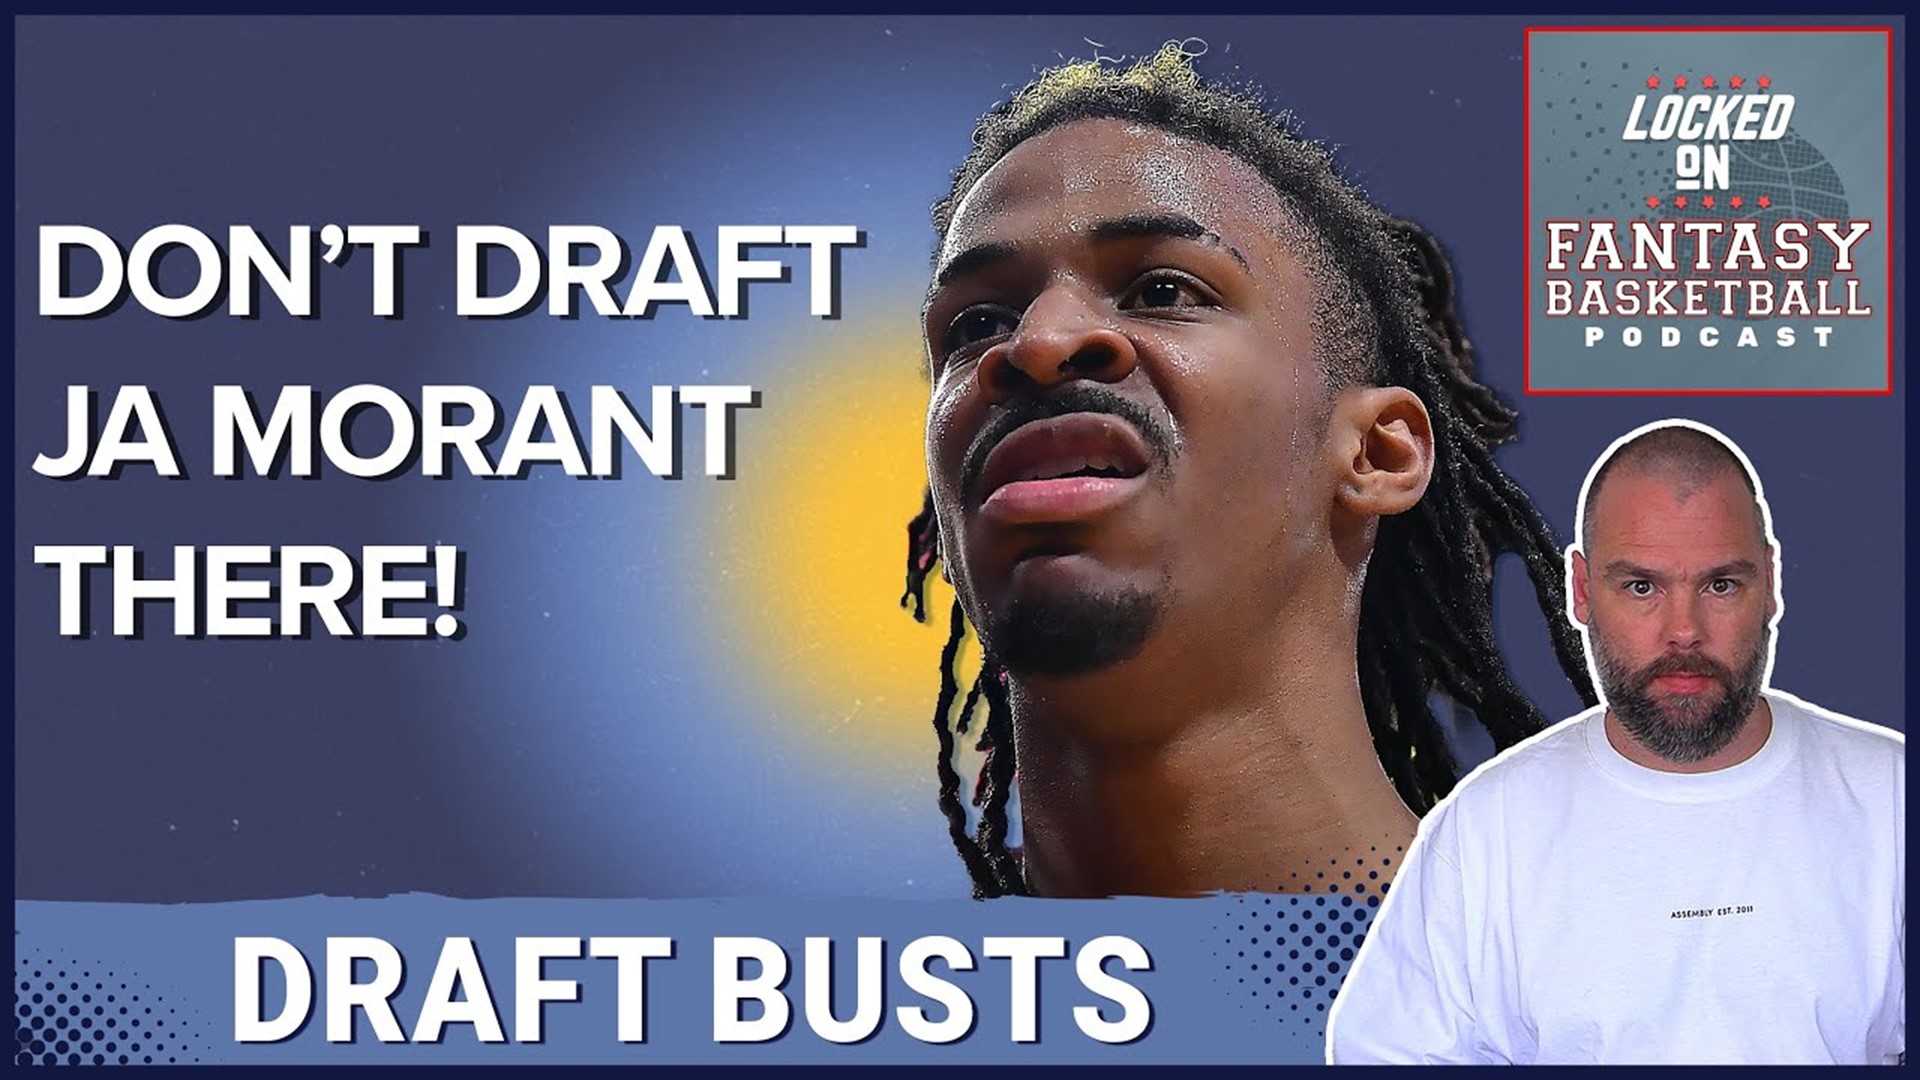 Josh Lloyd dives deep into the 2023 ESPN Fantasy Basketball rankings and identifies the busts you should steer clear of, including Ja Morant and De'Aaron Fox.